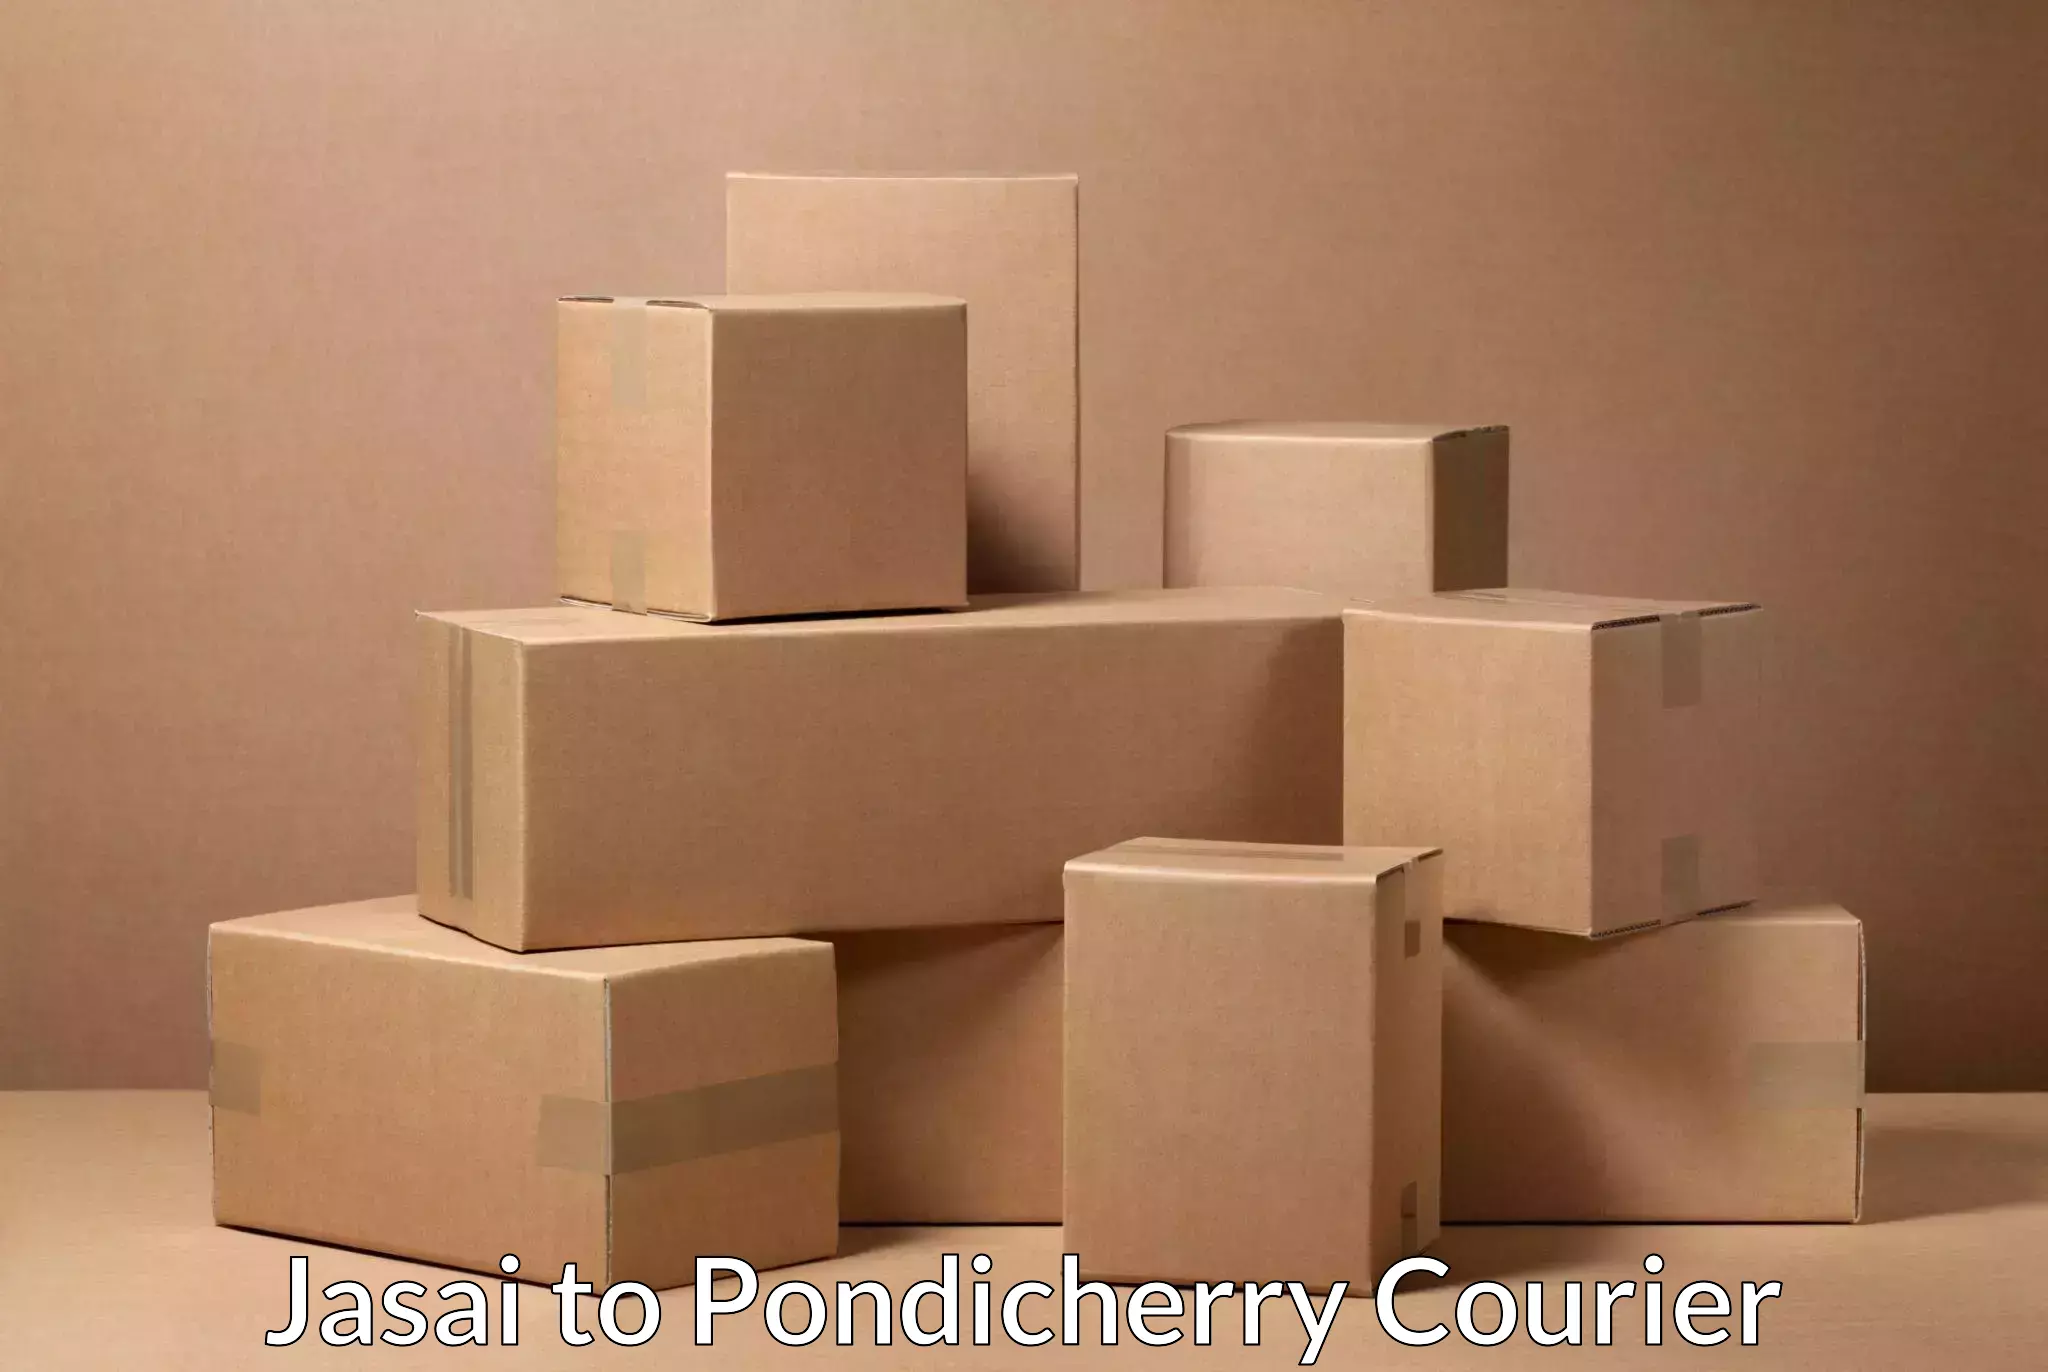 Online package tracking Jasai to Pondicherry University